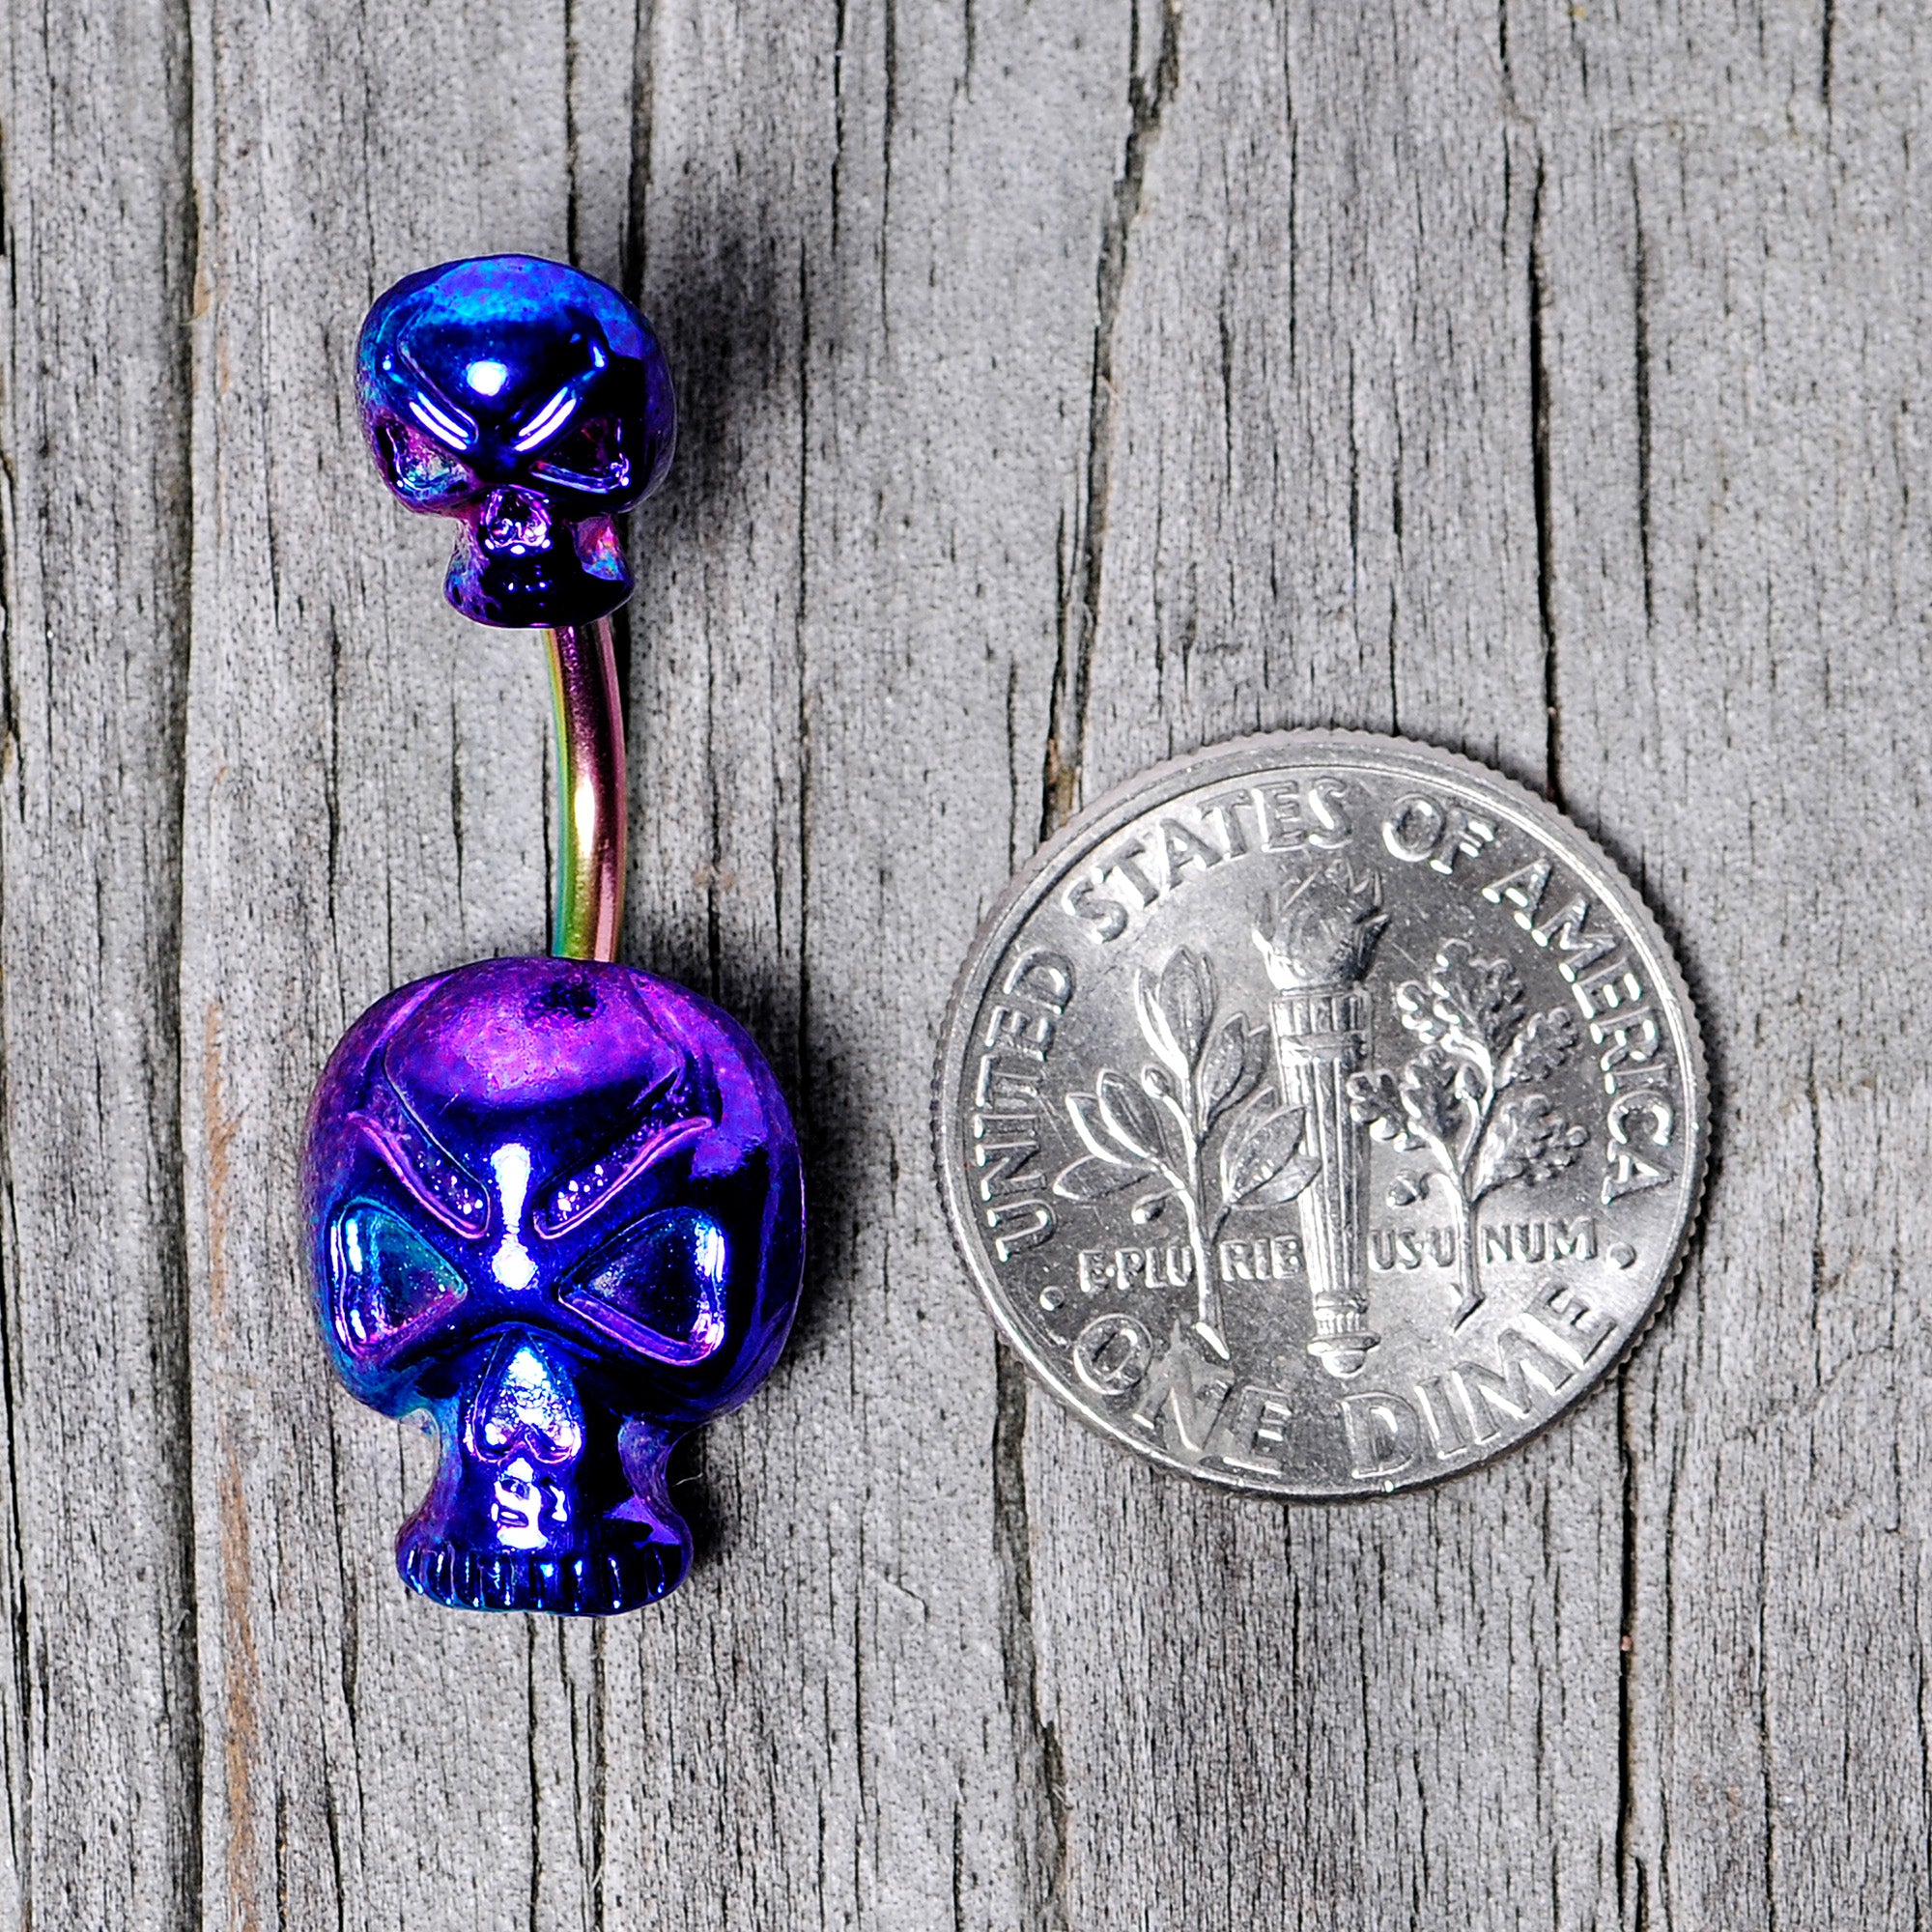 Rainbow Scary Double Skull Halloween Double Mount Belly Ring